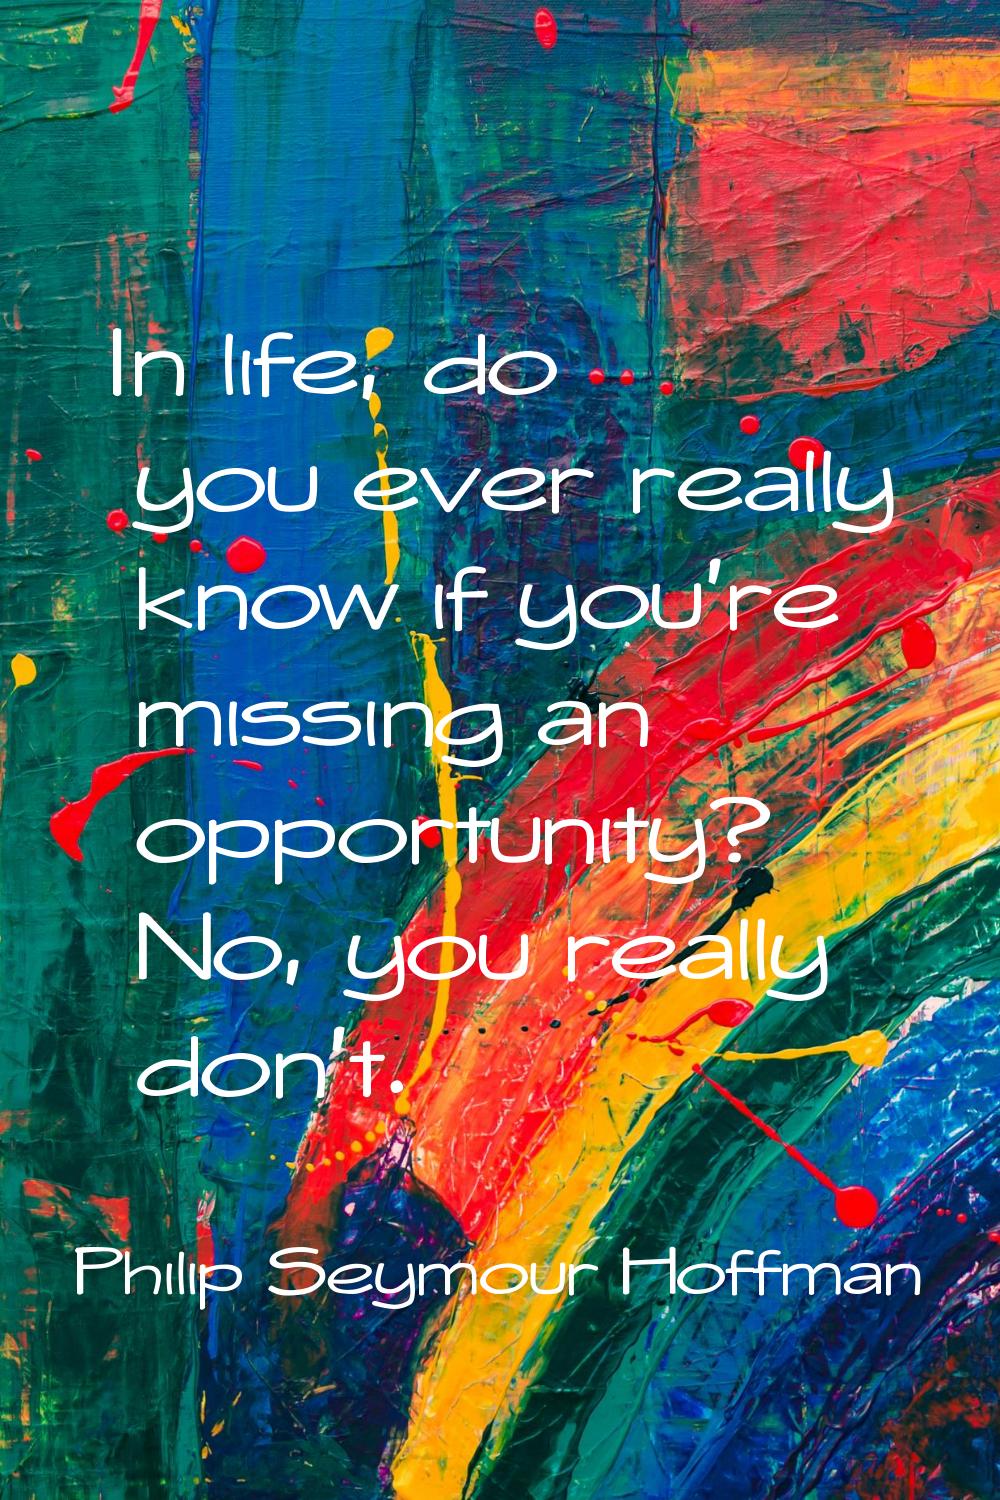 In life, do you ever really know if you're missing an opportunity? No, you really don't.